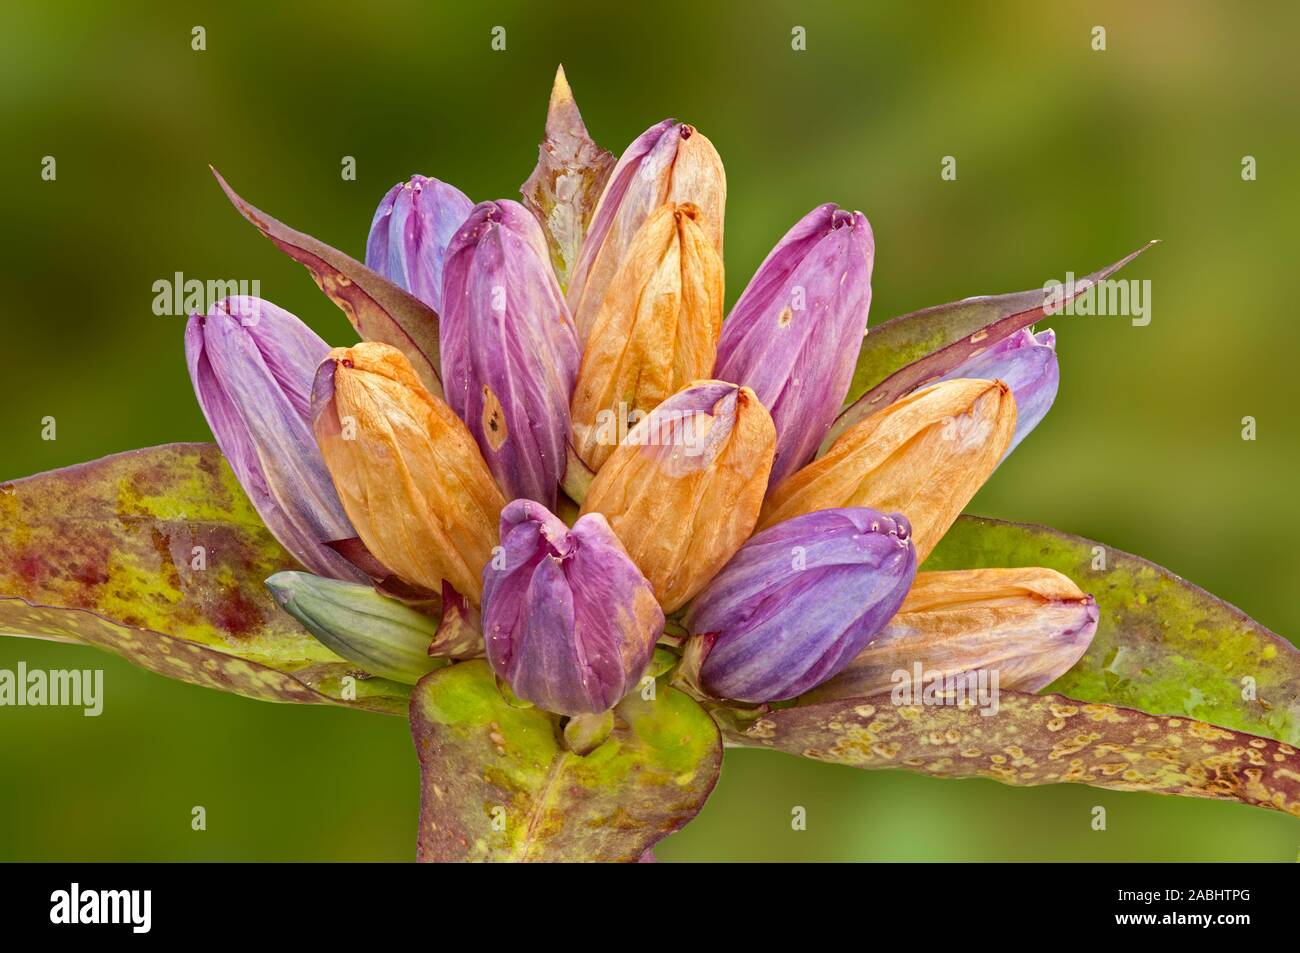 Prairie plant of bottle gentian (closed gentian of species Gentiana andrewsiias Griseb), its purple and blue flowers fade into an autumn palette. Stock Photo